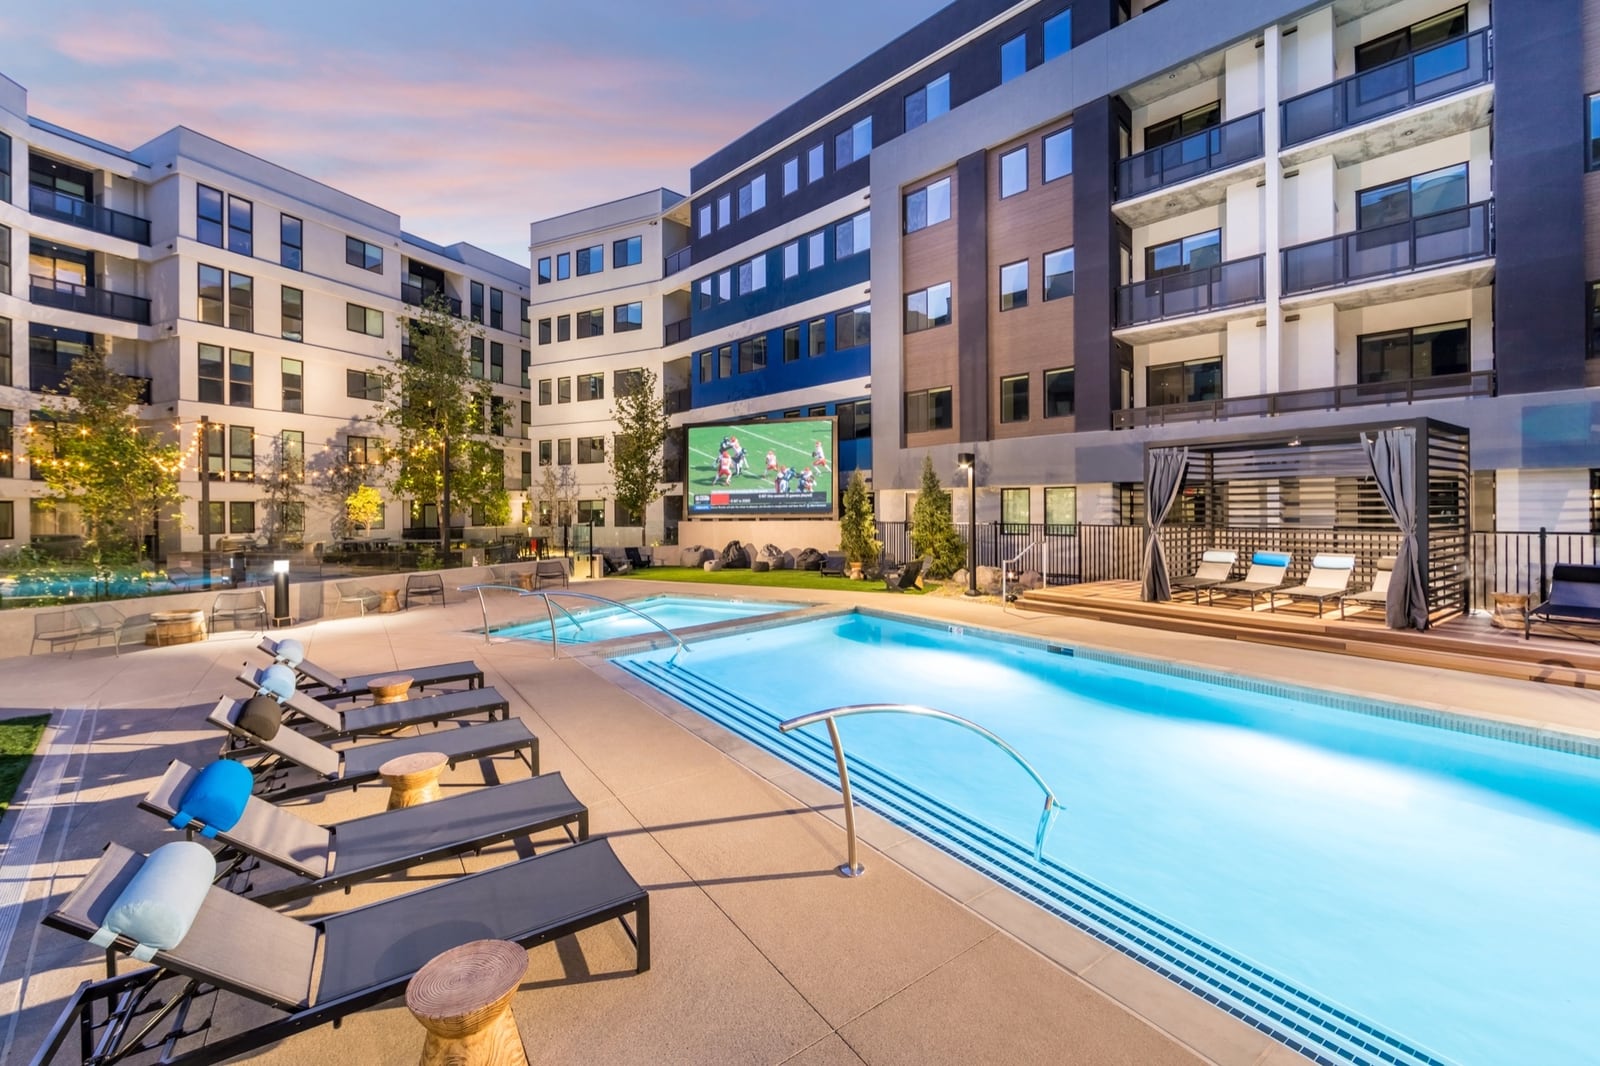 Pool and spa at dusk with poolside jumbo LED and private cabanas at Emory apartment homes